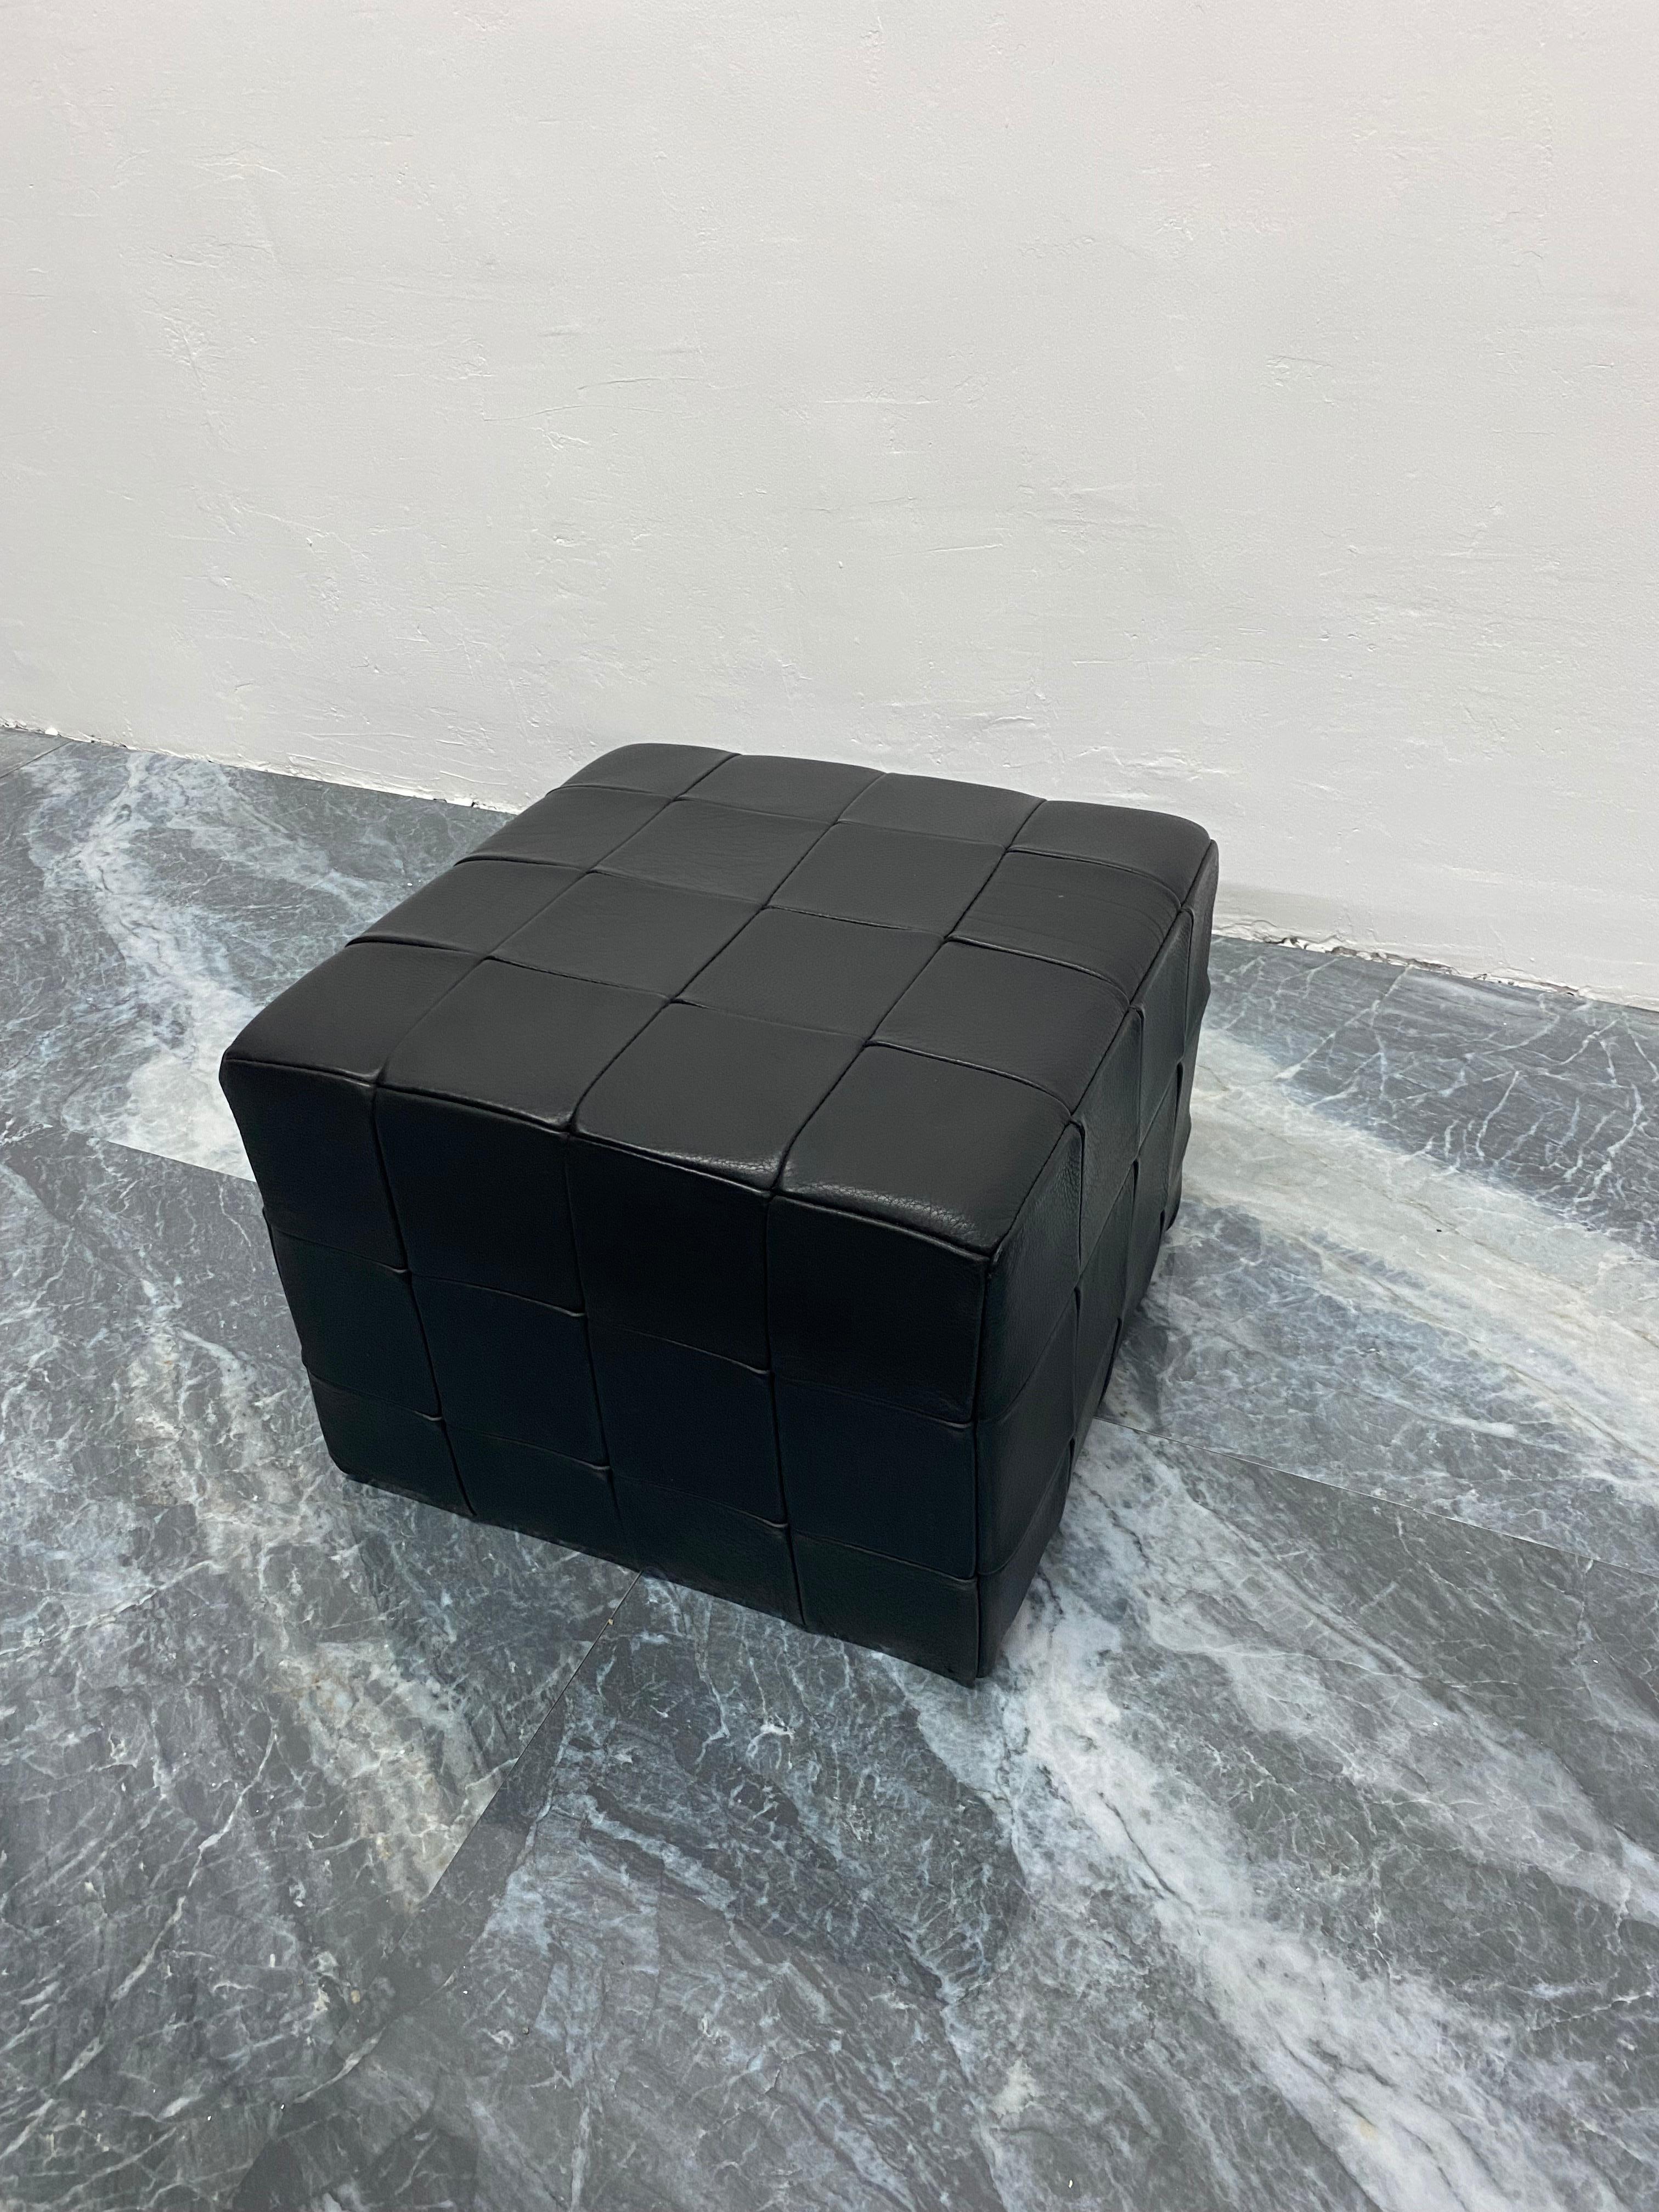 Patchwork Black Leather Pouf or Ottoman, Denmark 1970s For Sale 3